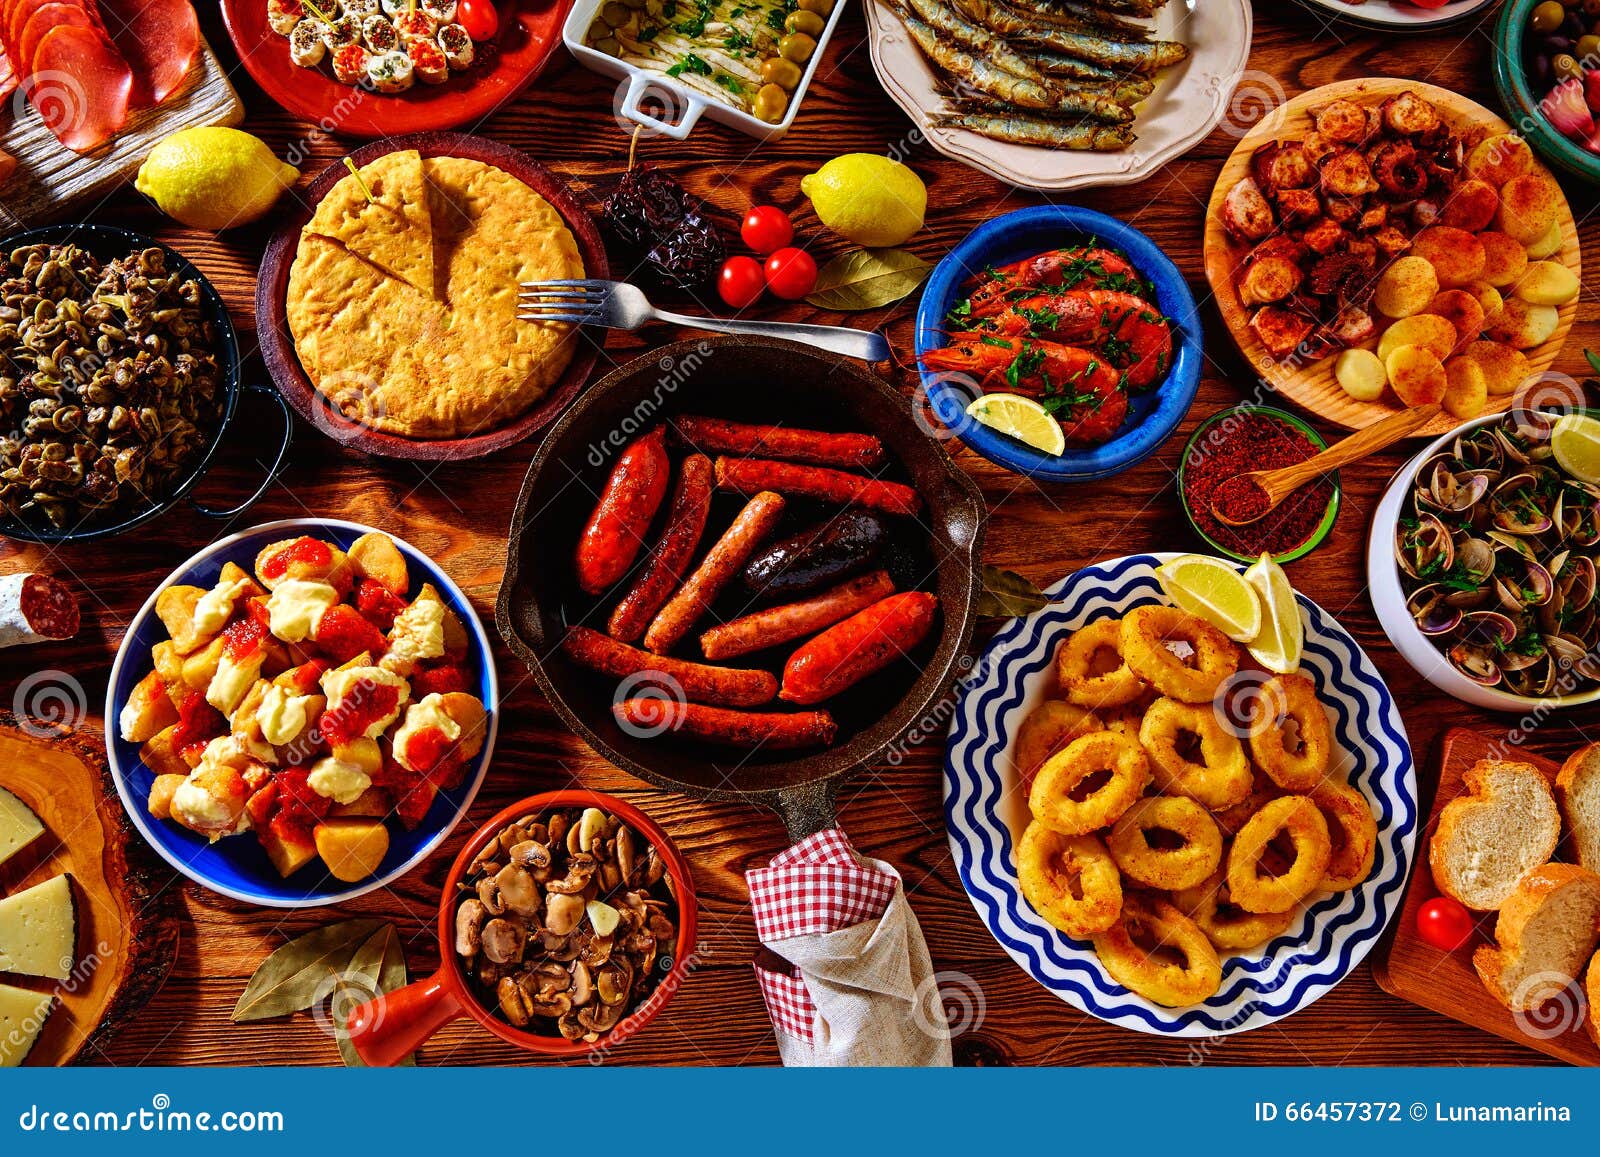 tapas from spain mix of most popular